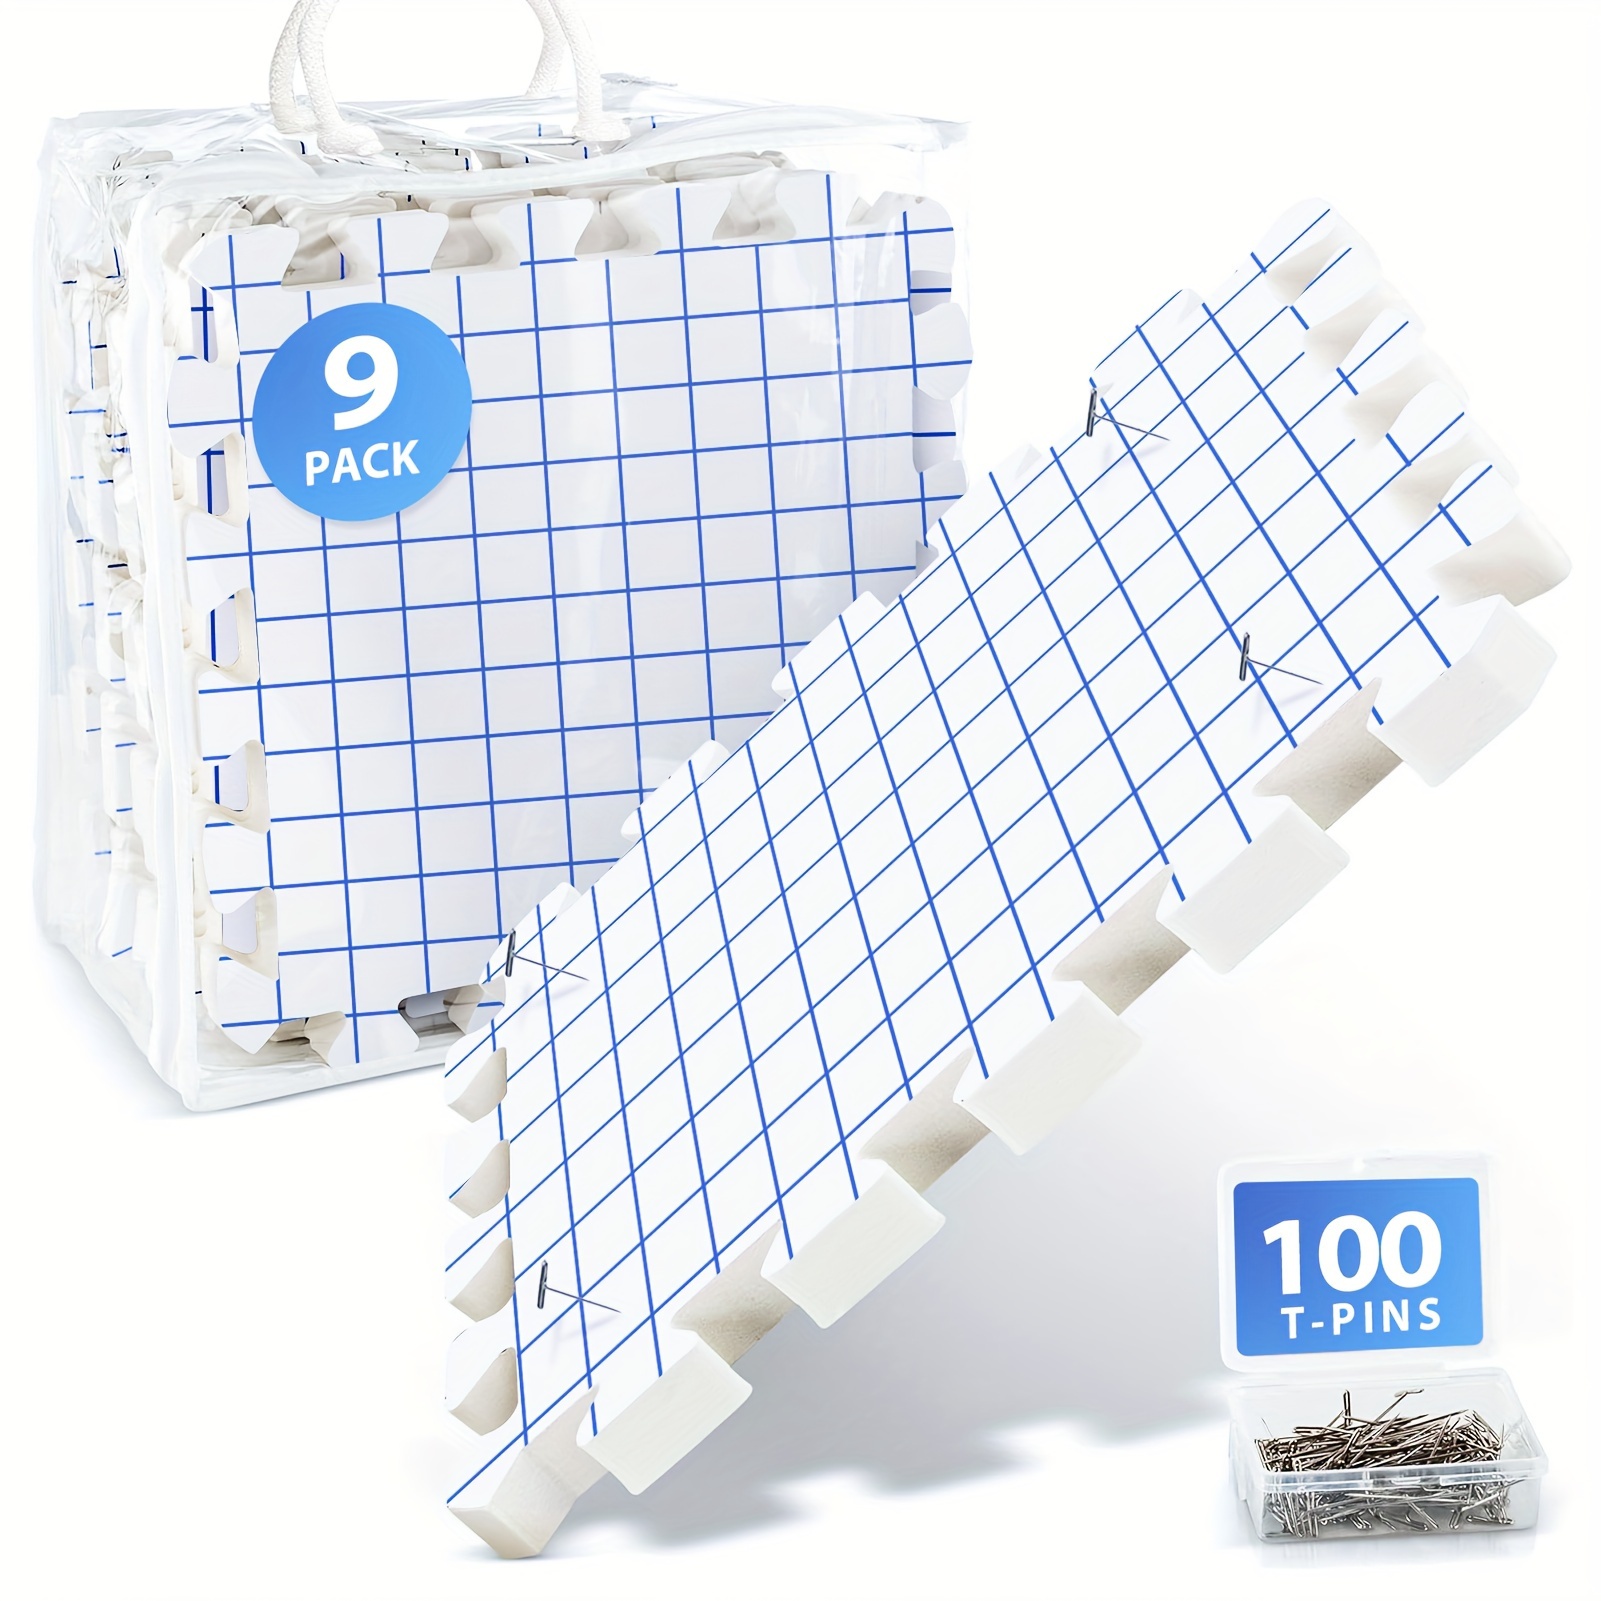 Knitiq Blocking Mats for Knitting - Extra Thick Blocking Boards with Grids with 100 T-Pins and Storage Bag for Needlework or Crochet